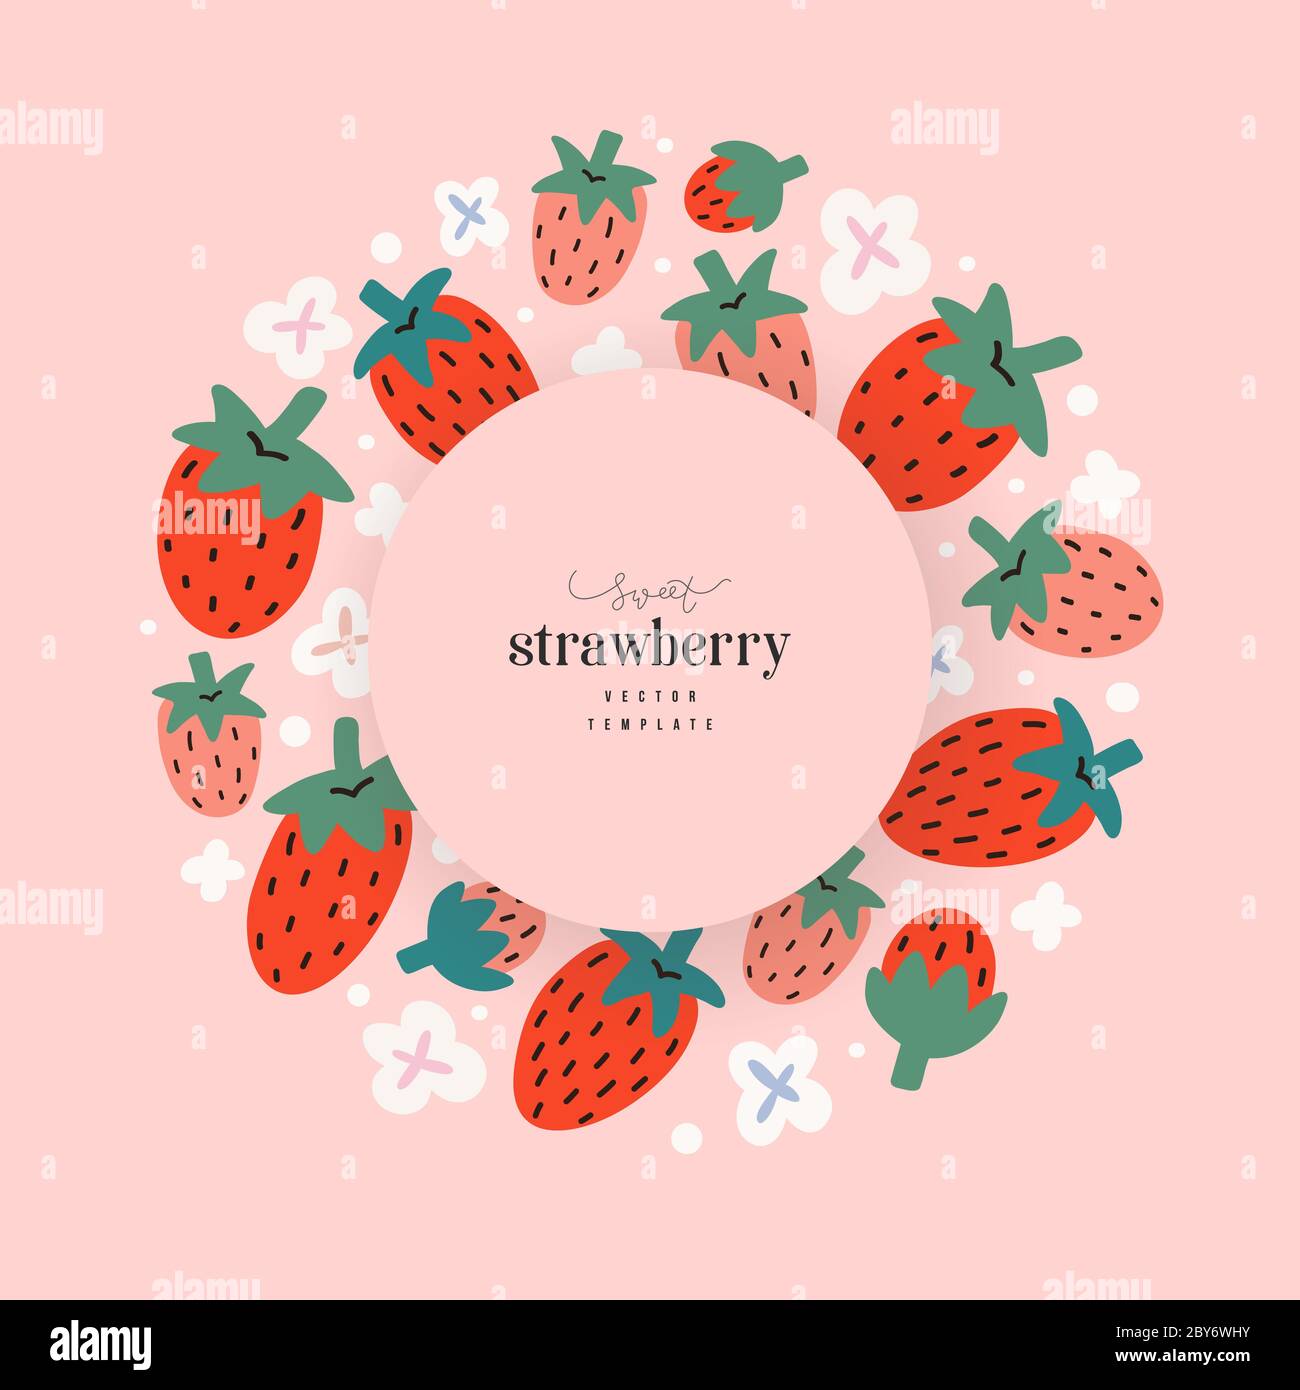 Strawberry template for packaging design with copy space for company logo, modern hand drawn illustration of fresh summer red berries, circle Stock Vector